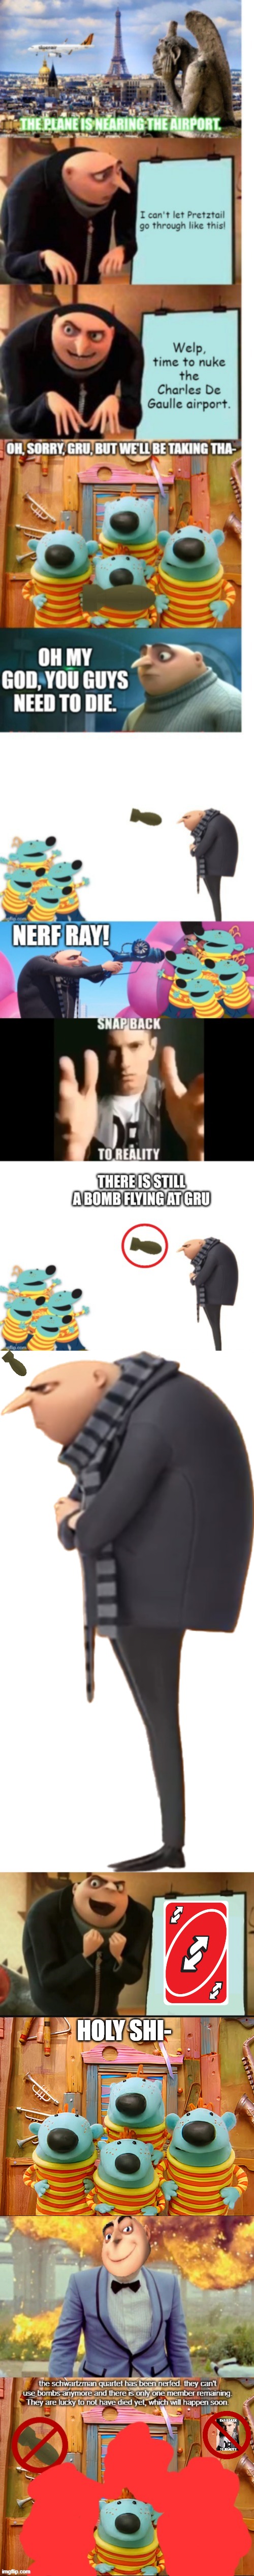 The "Snap Back To Reality" card is WAY overpowered, but luckily, Team Wheatley knows how to cope with it. | HOLY SHI- | image tagged in despicable me gru,5 panel gru meme,schwartzman quartet | made w/ Imgflip meme maker